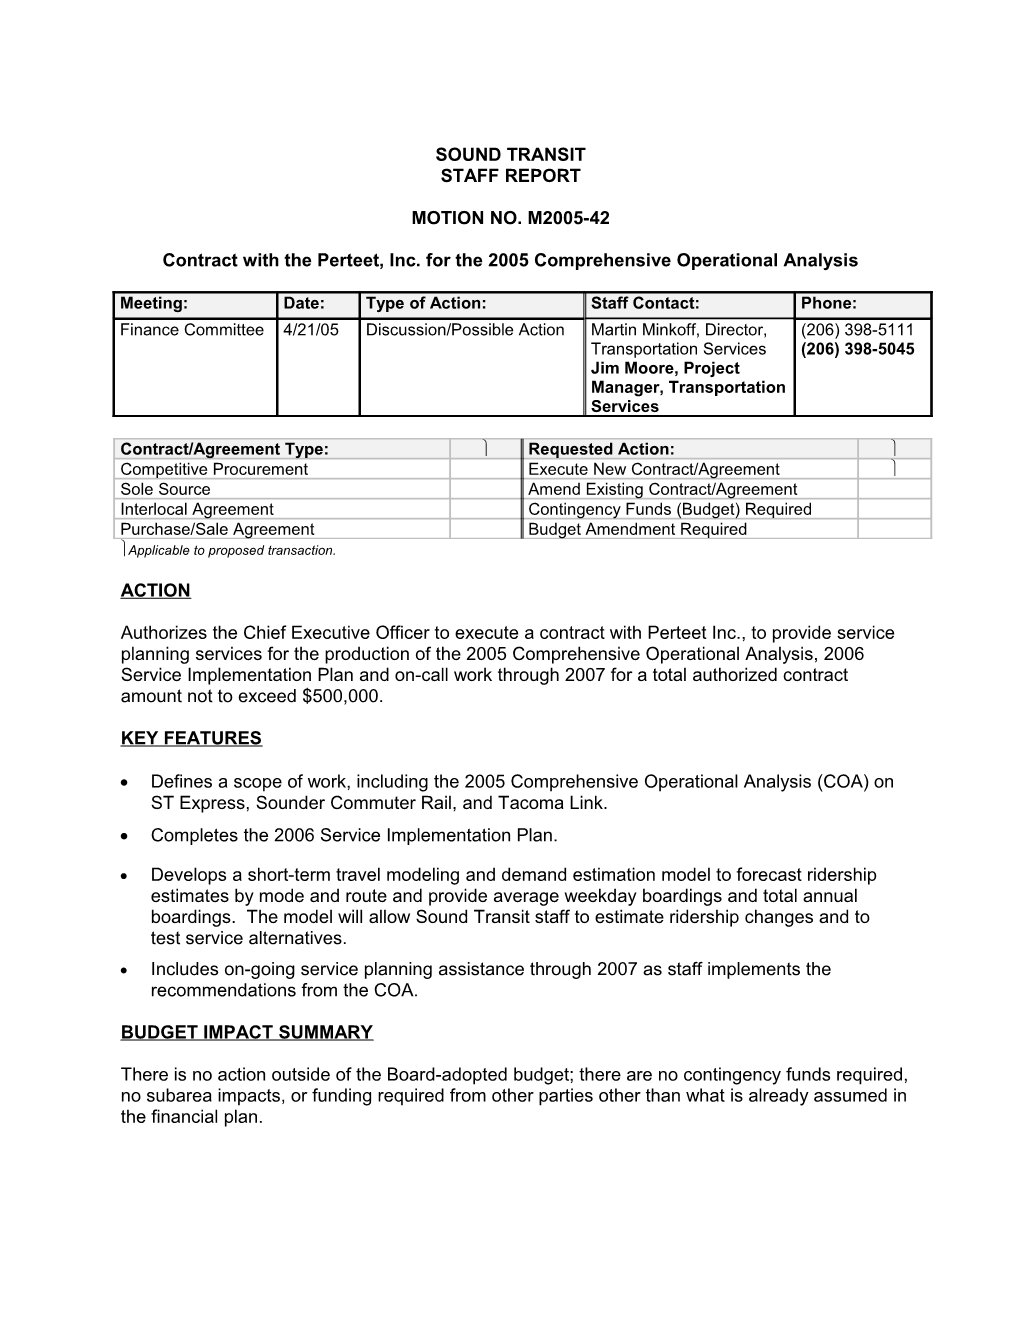 Contract with the Perteet, Inc. for the 2005 Comprehensive Operational Analysis